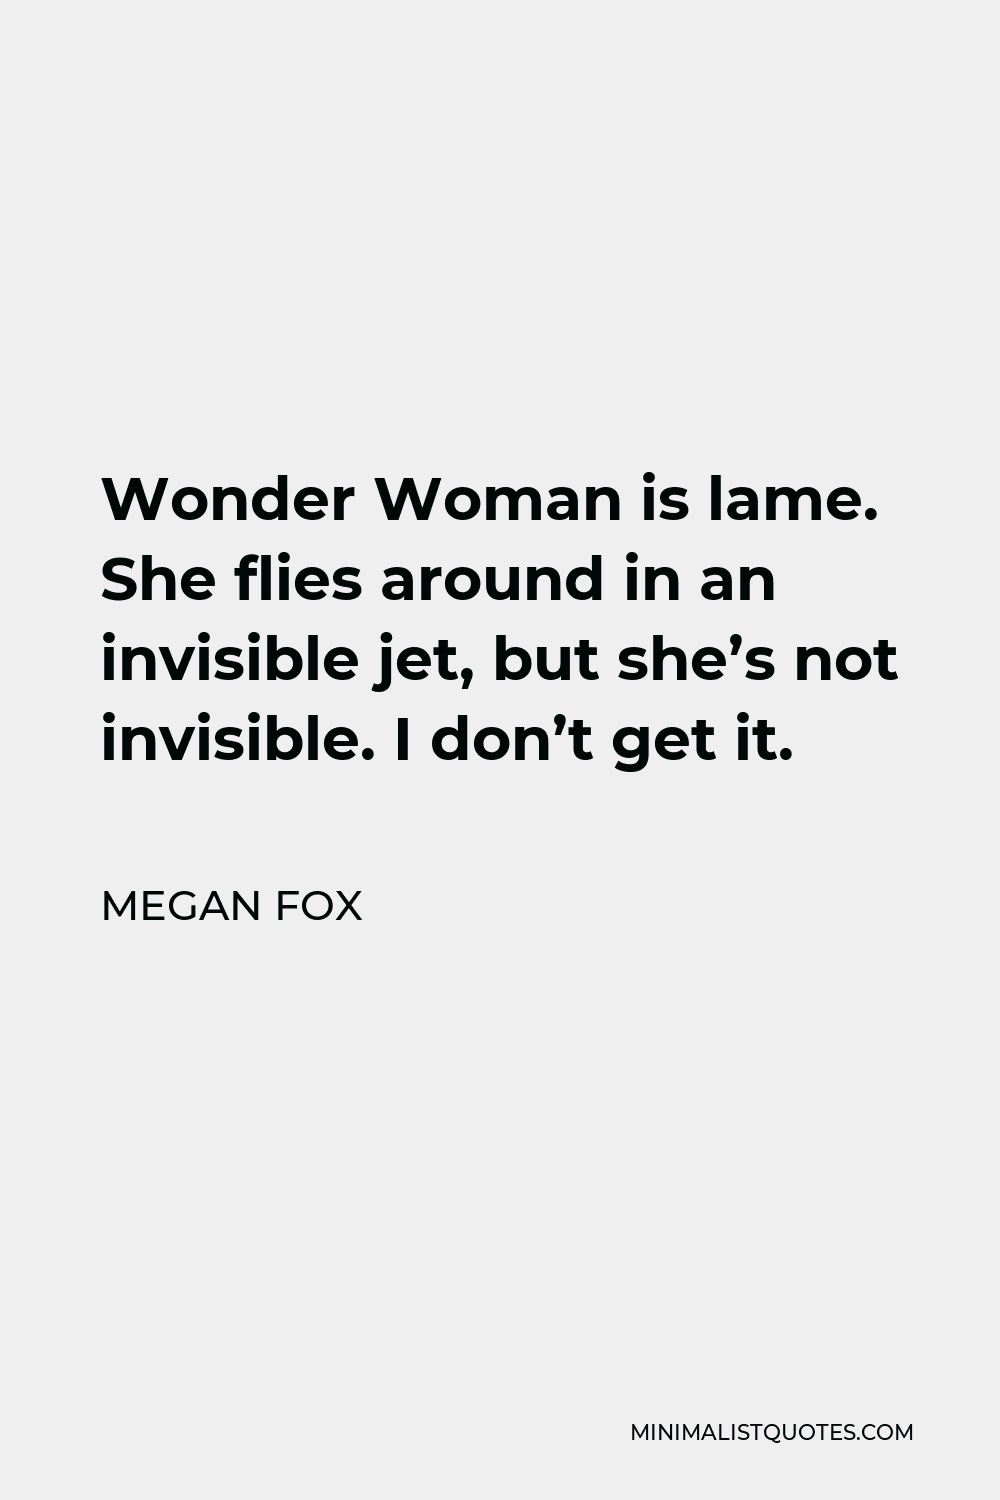 Megan Fox Quote - Wonder Woman is lame. She flies around in an invisible jet, but she’s not invisible. I don’t get it.